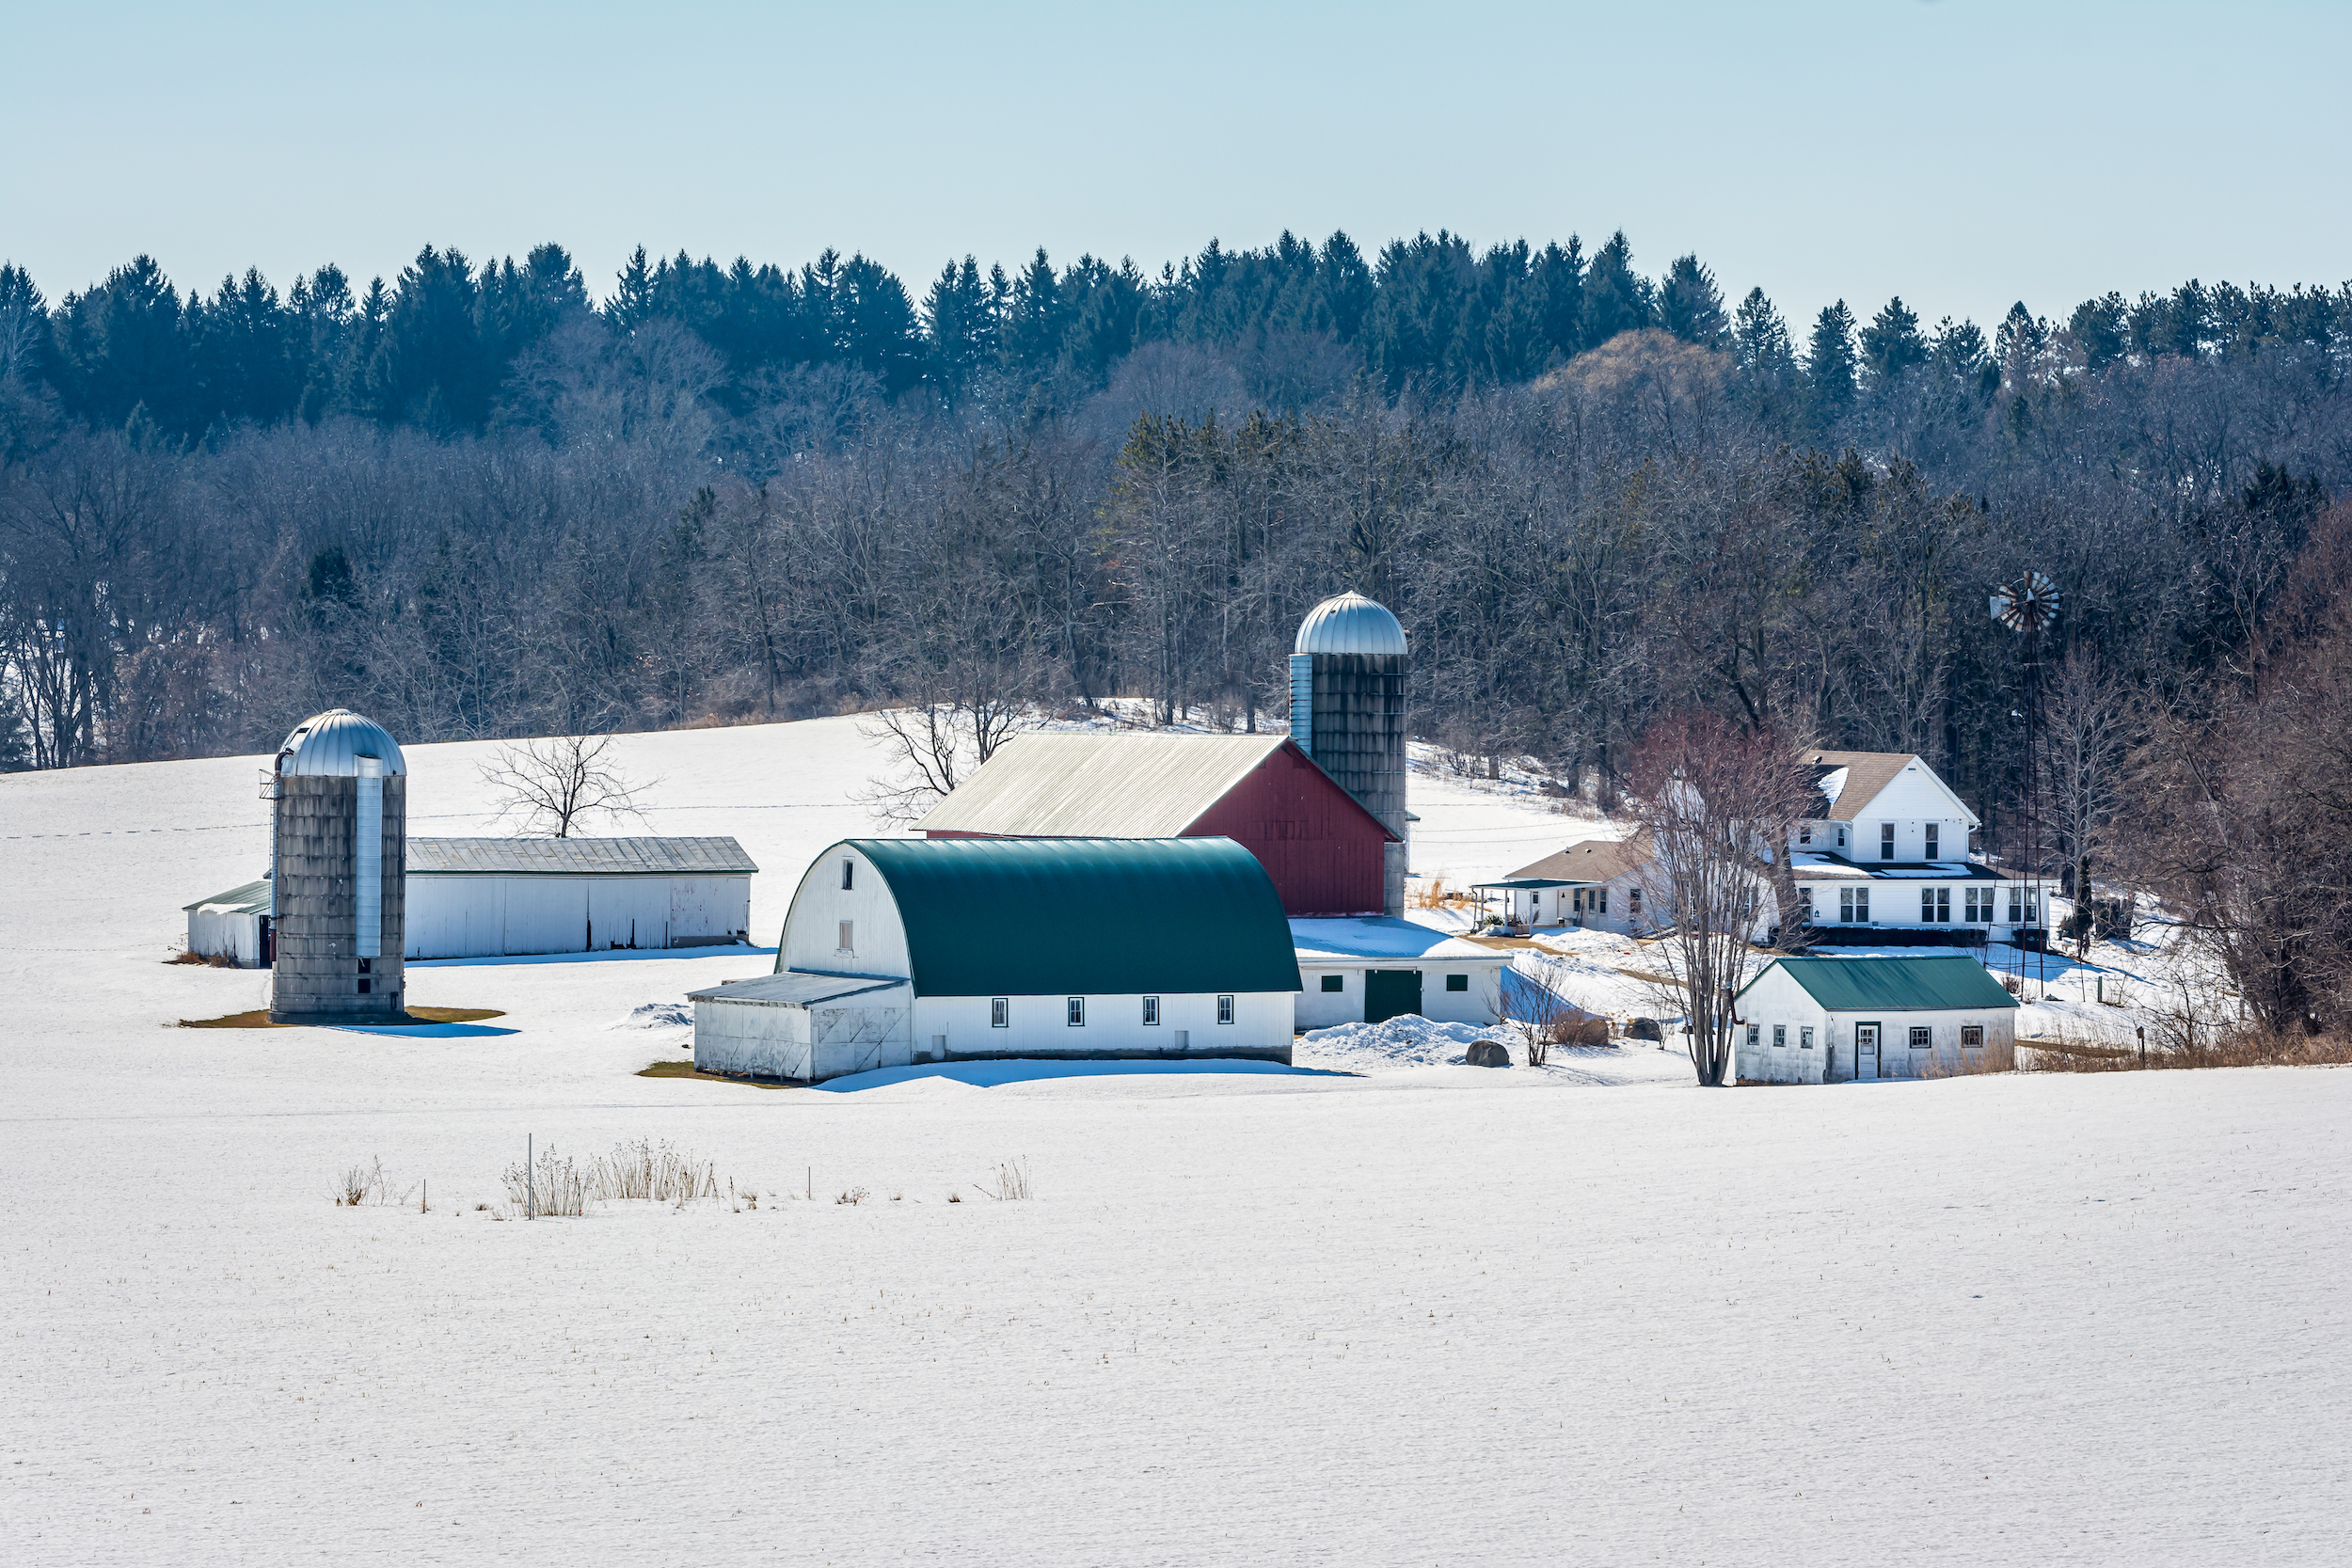 Legislation by Sen. Tammy Baldwin requires more transparency around foreign owners of US farmland